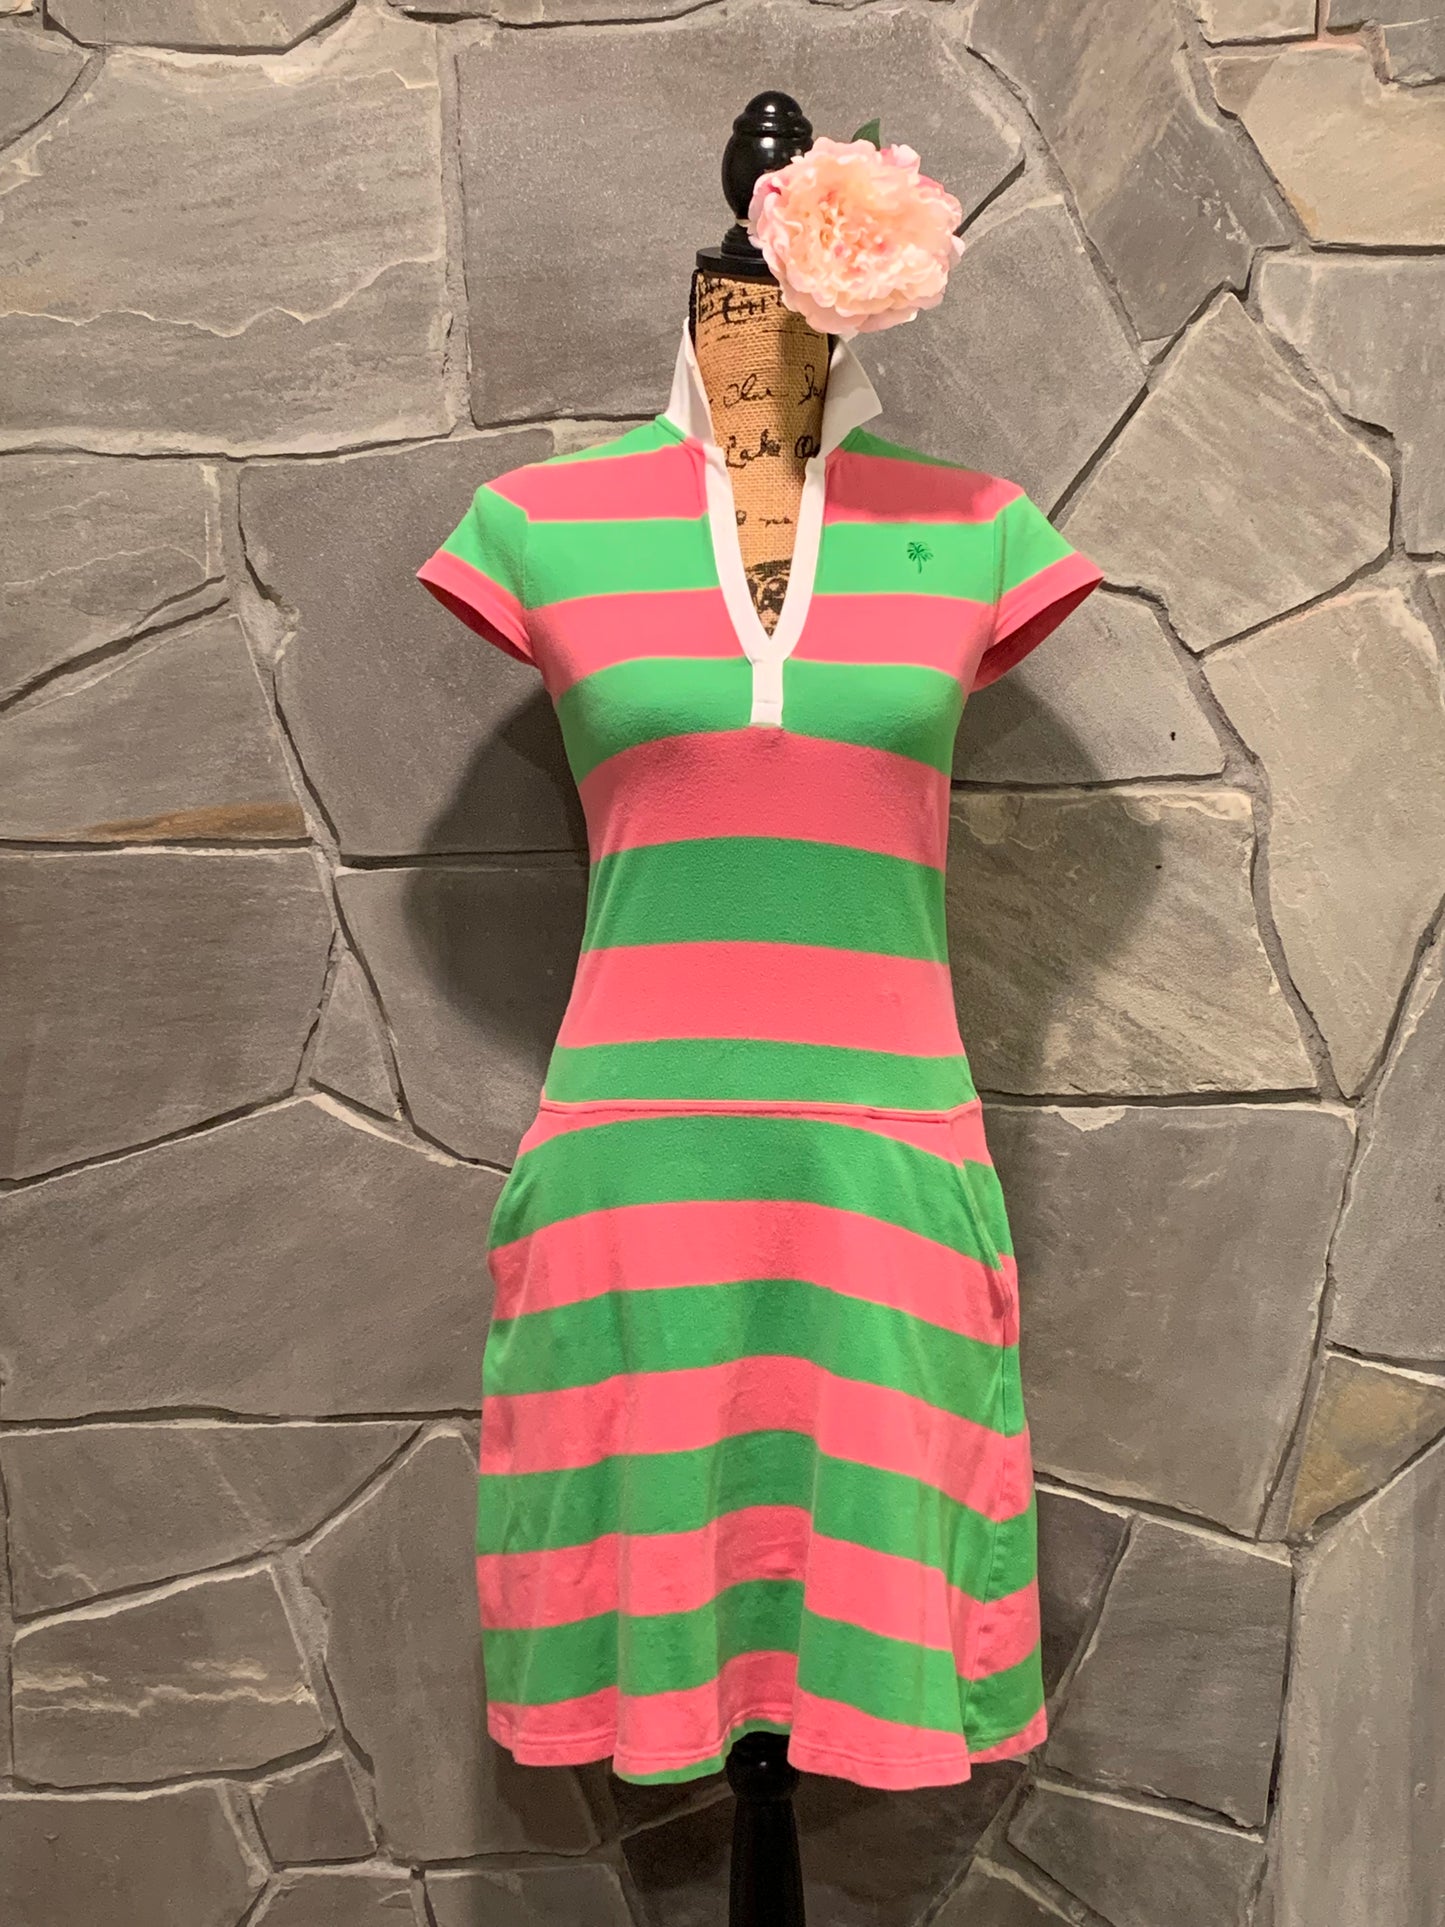 Lilly Pulitzer Striped Pink and Green Tennis Dress